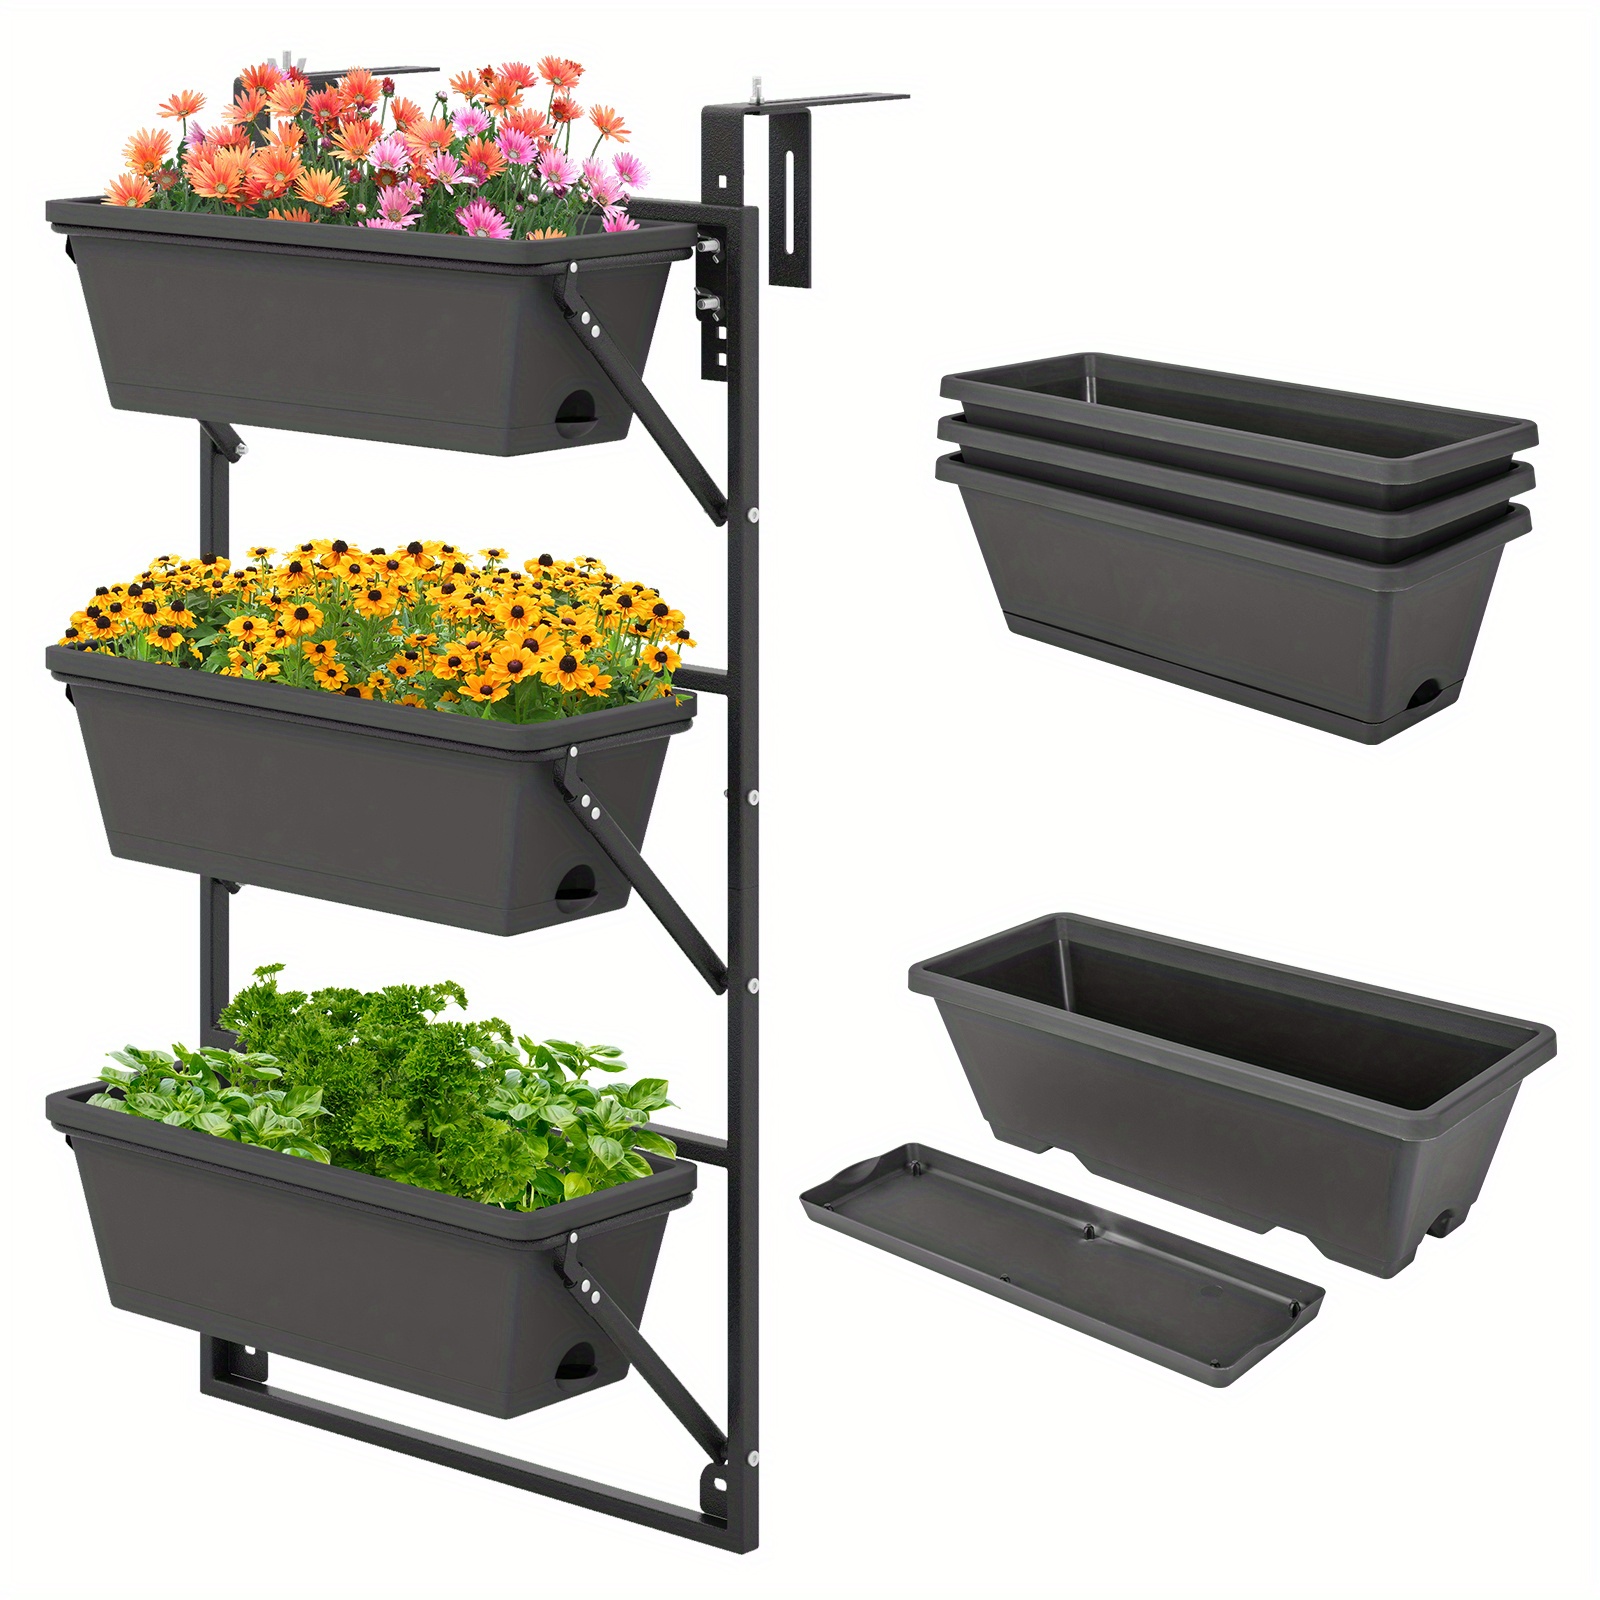 

Hanging Vertical Planter With 3 Planter Boxes & Detachable Hooks For Flowers